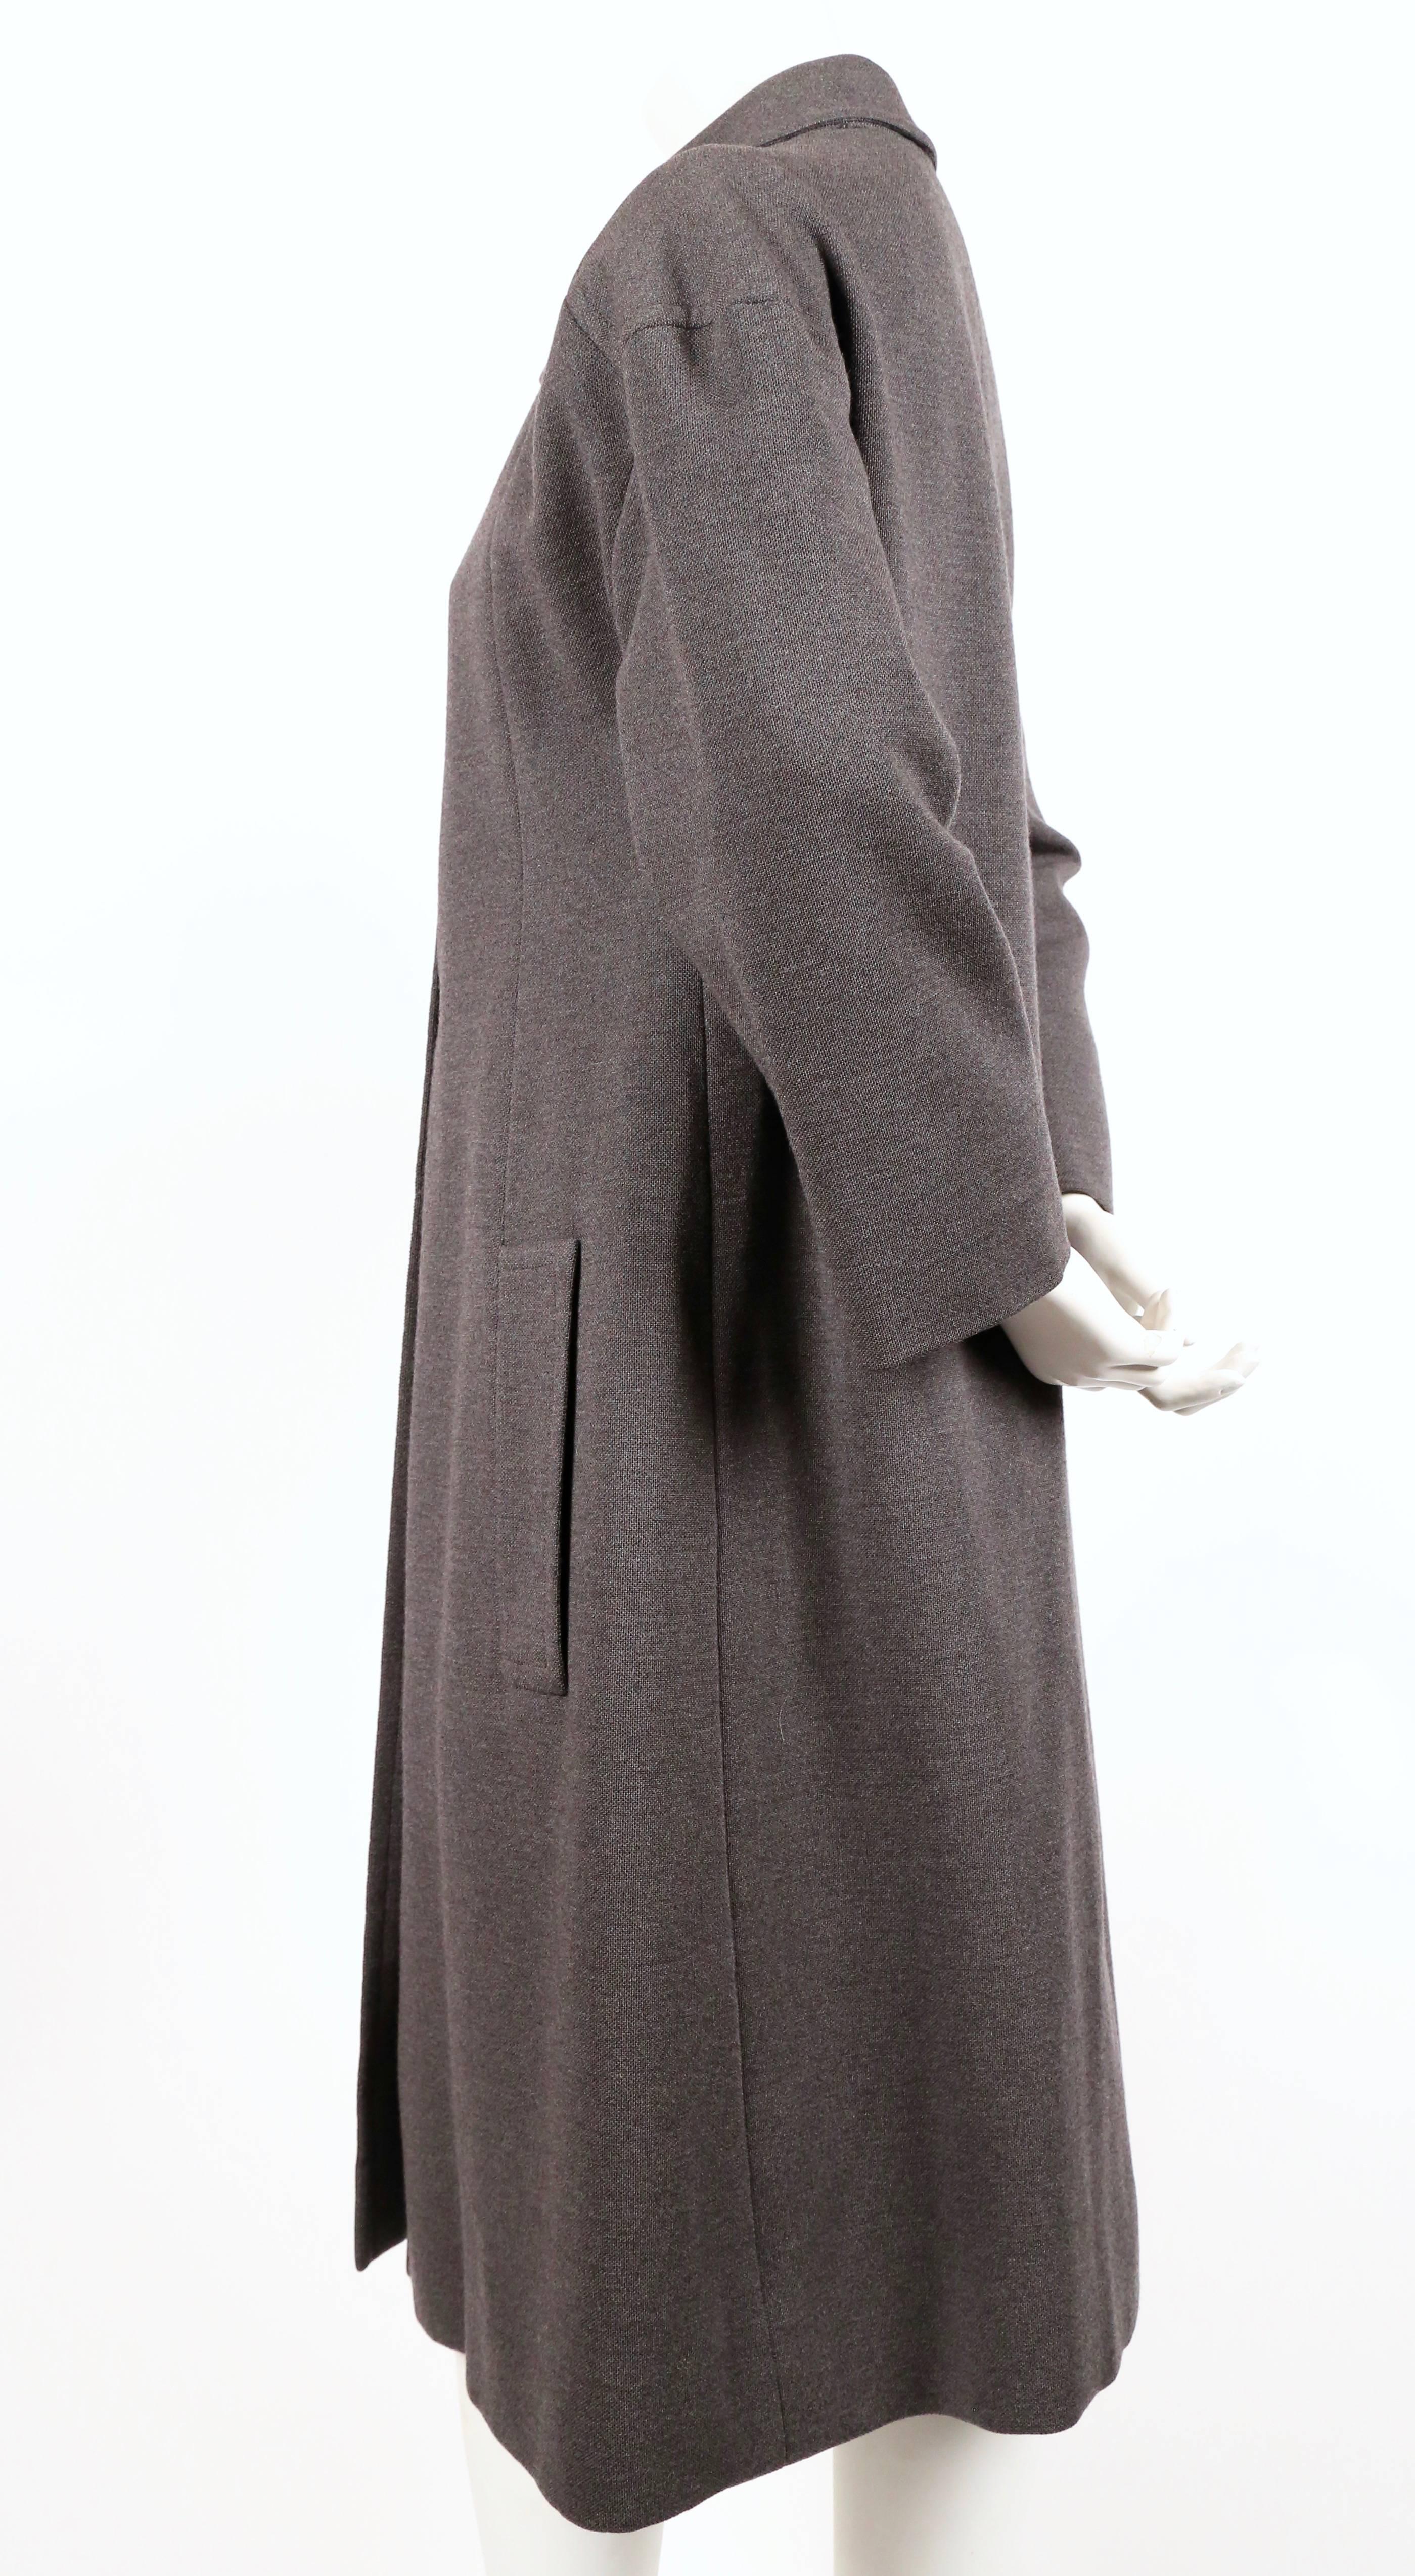 Charcoal grey wool couture coat from Yves Saint Laurent dating to the 1960's. All the details that you would expect from a couture garment. The approximate measurements are: bust 40